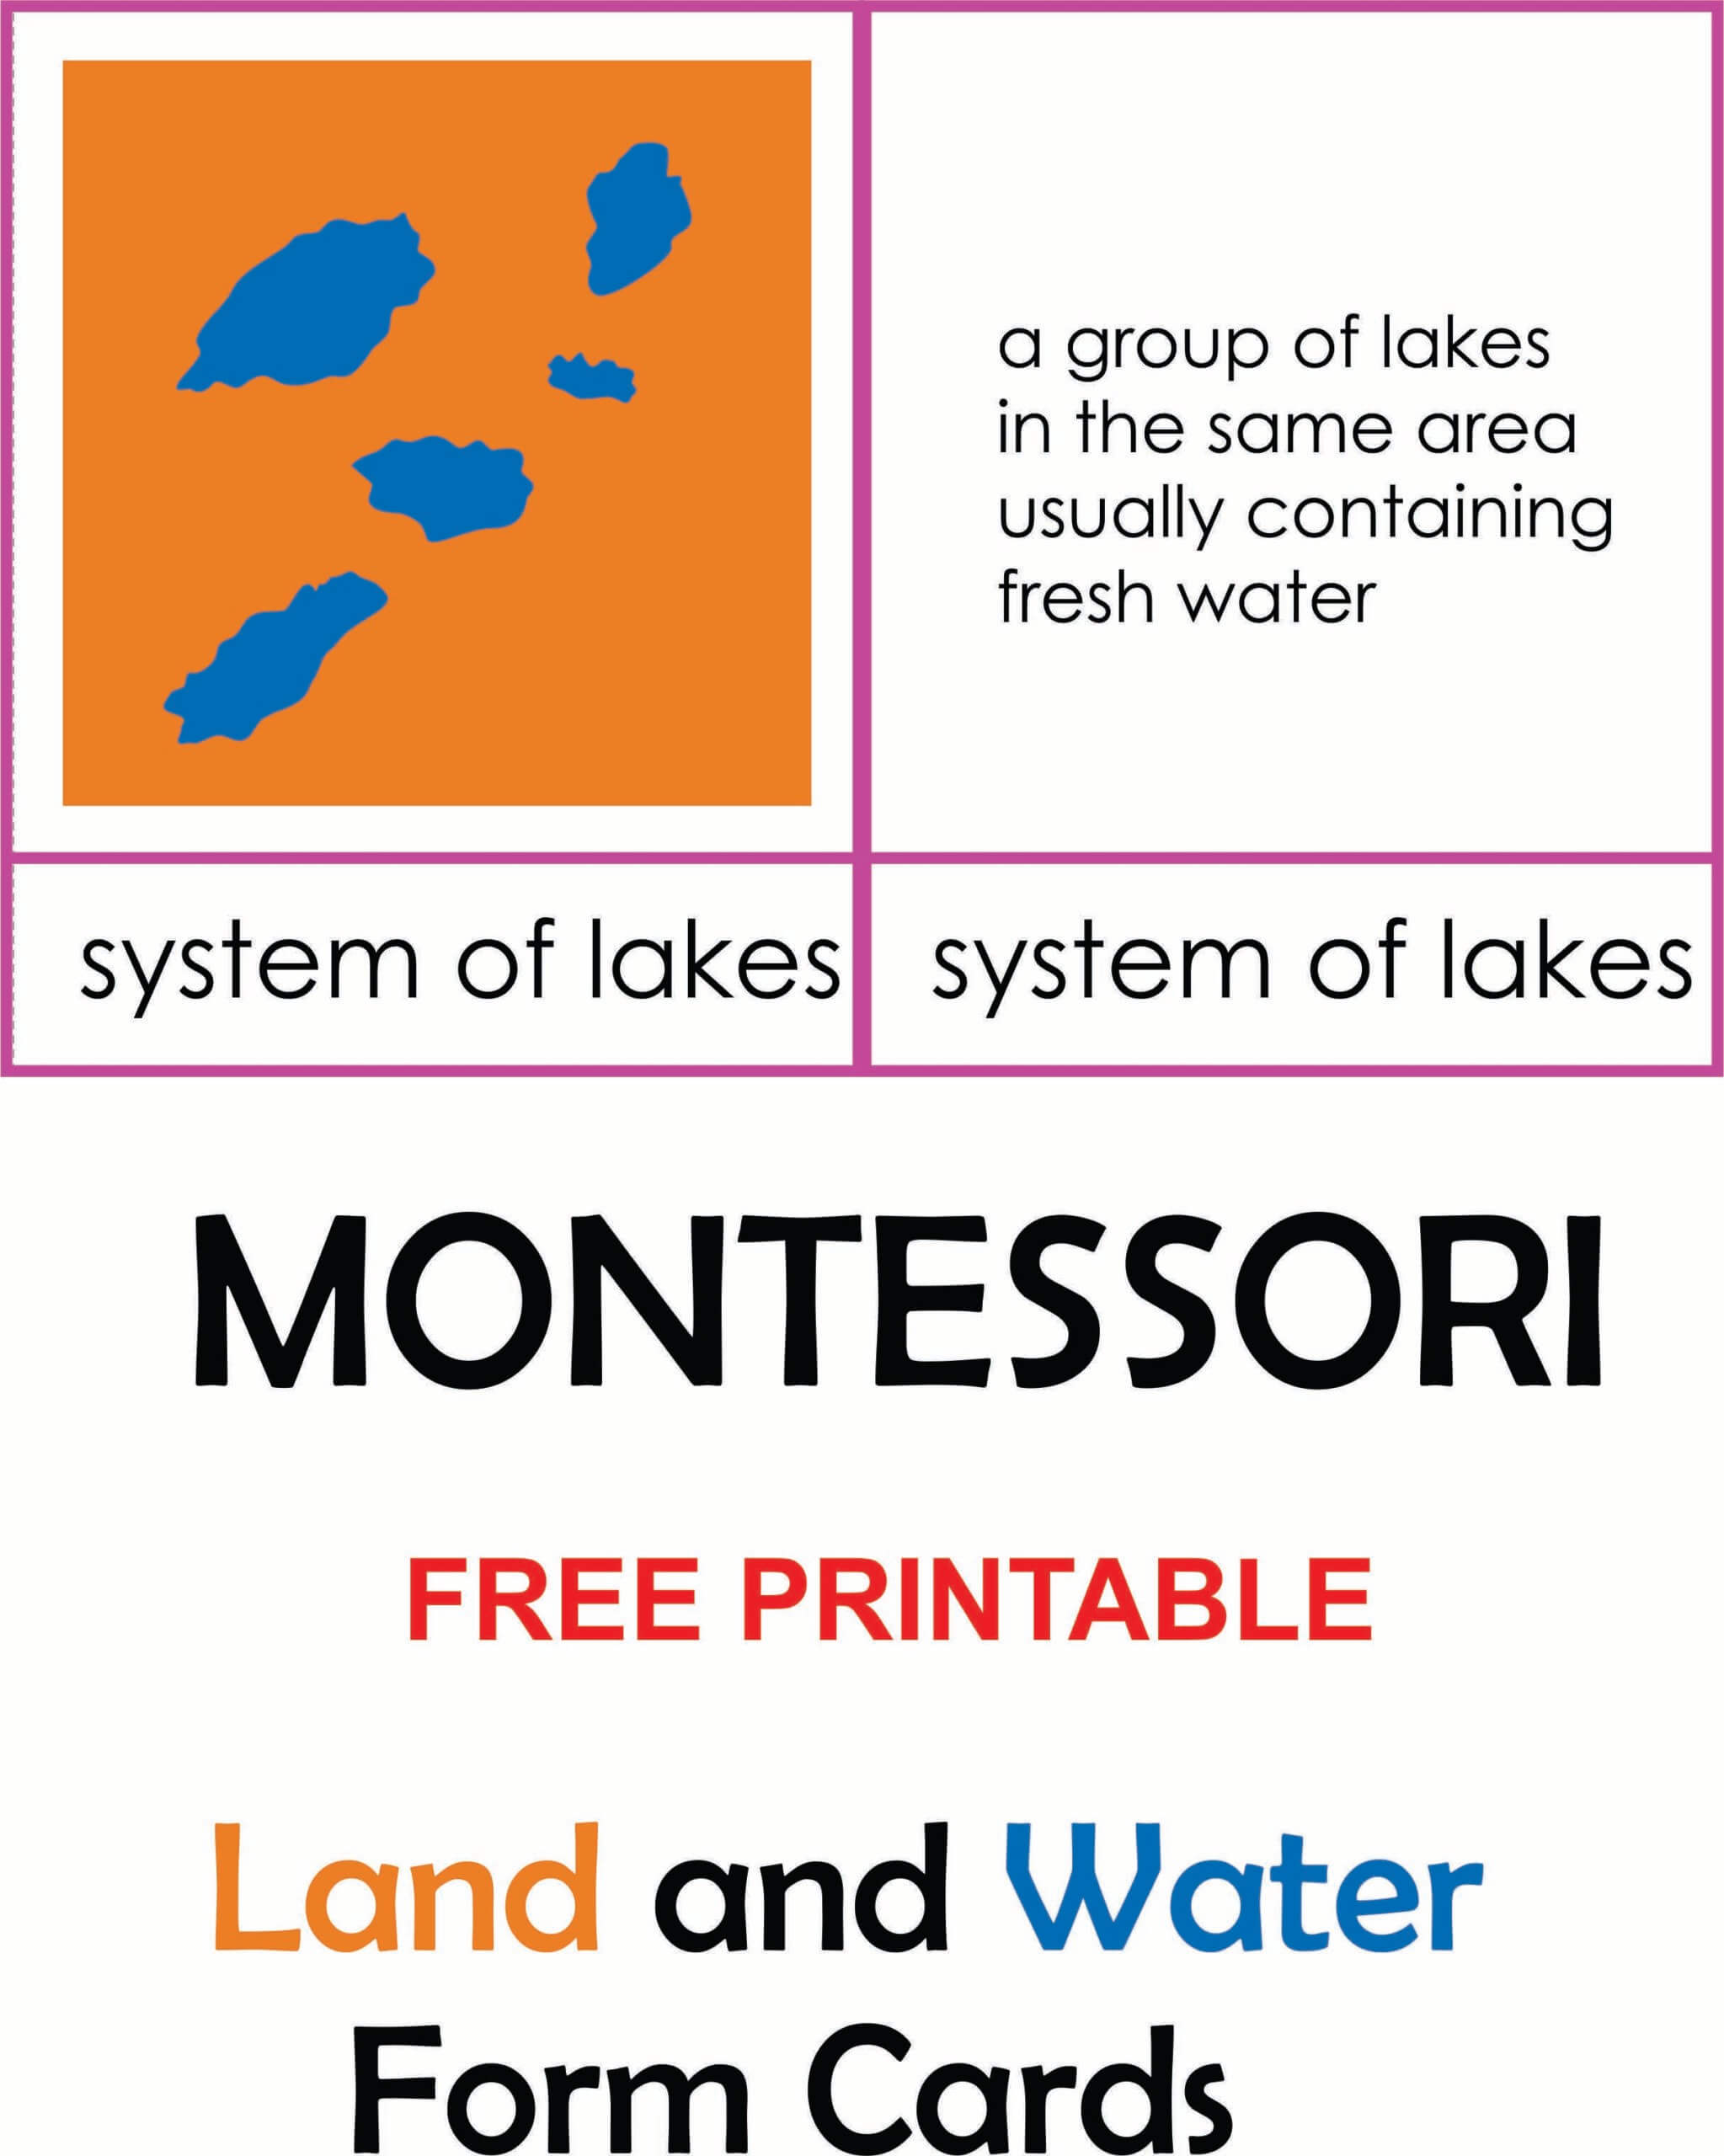 land and water forms cards printable Montessori